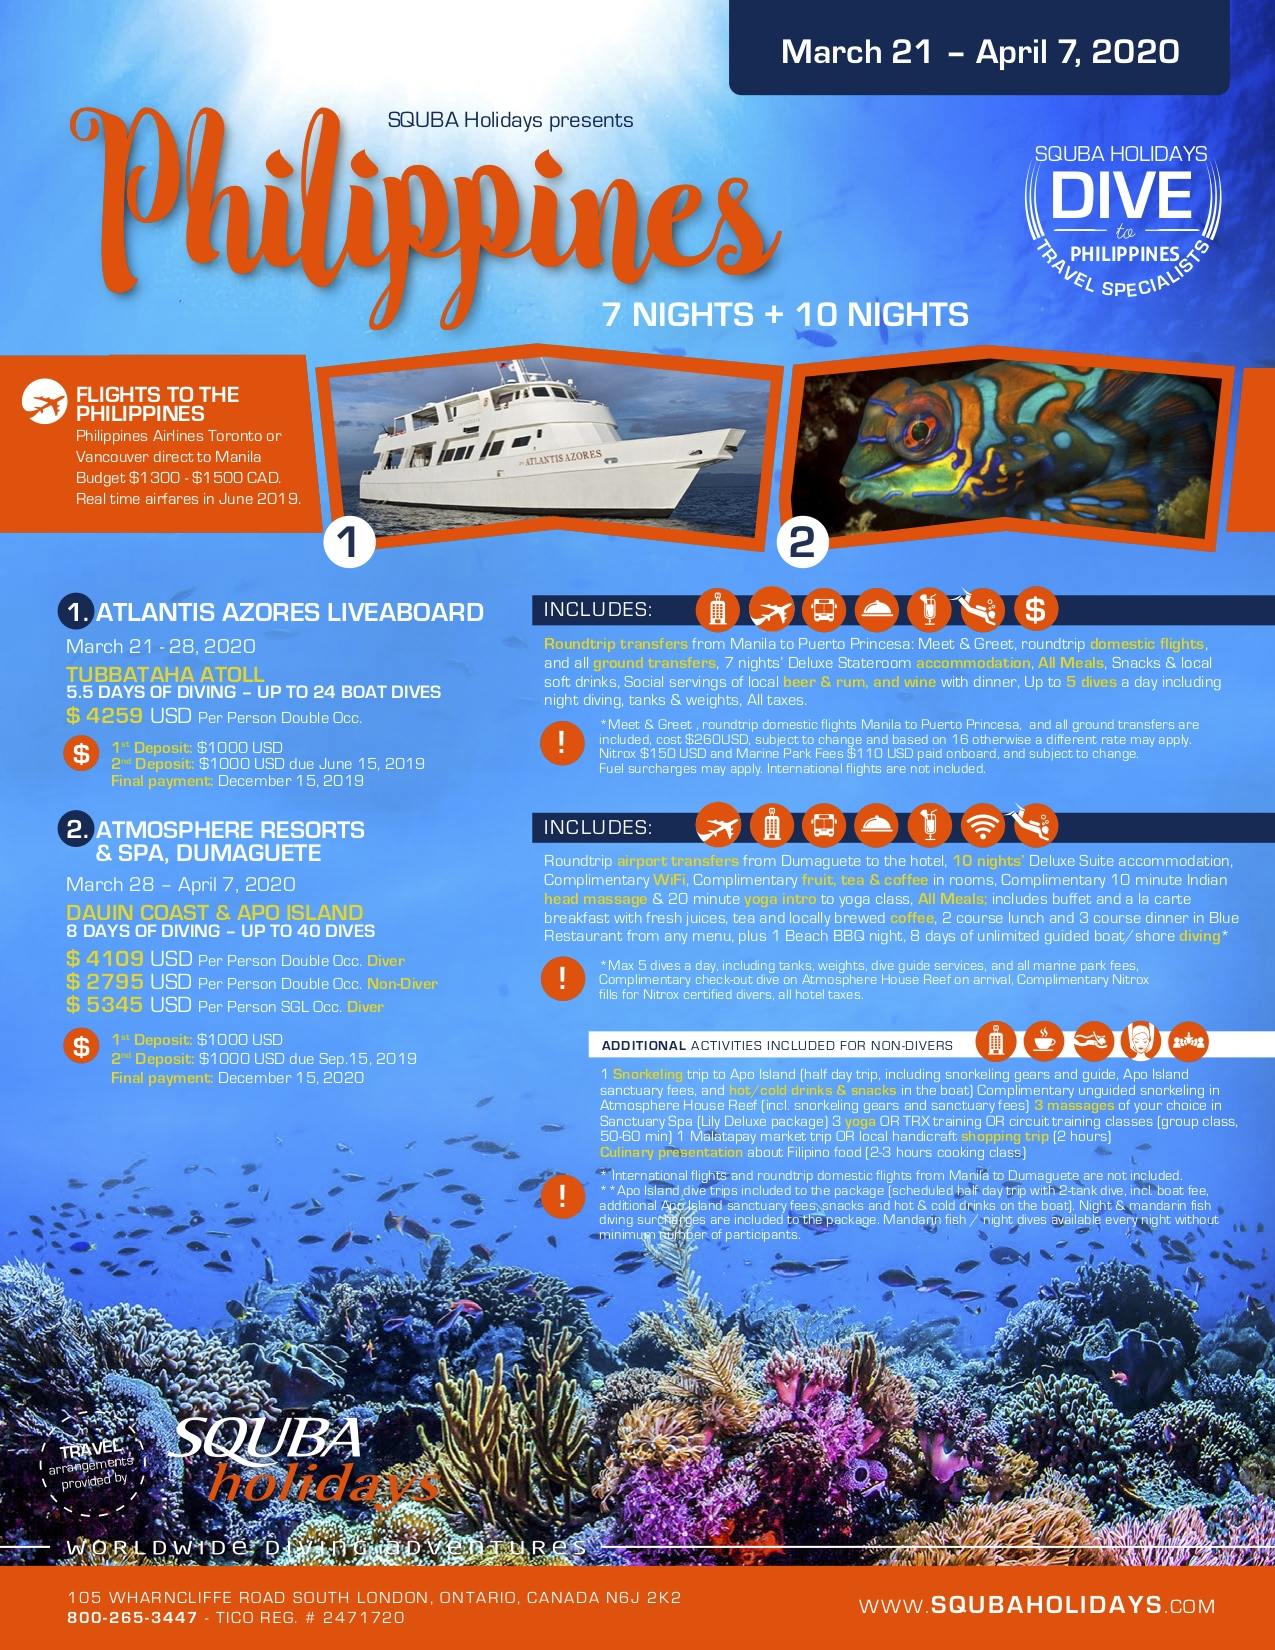 Holidays To The Philipines In March 2020 | Calendar November 2021 Calendar With Holidays Philippines